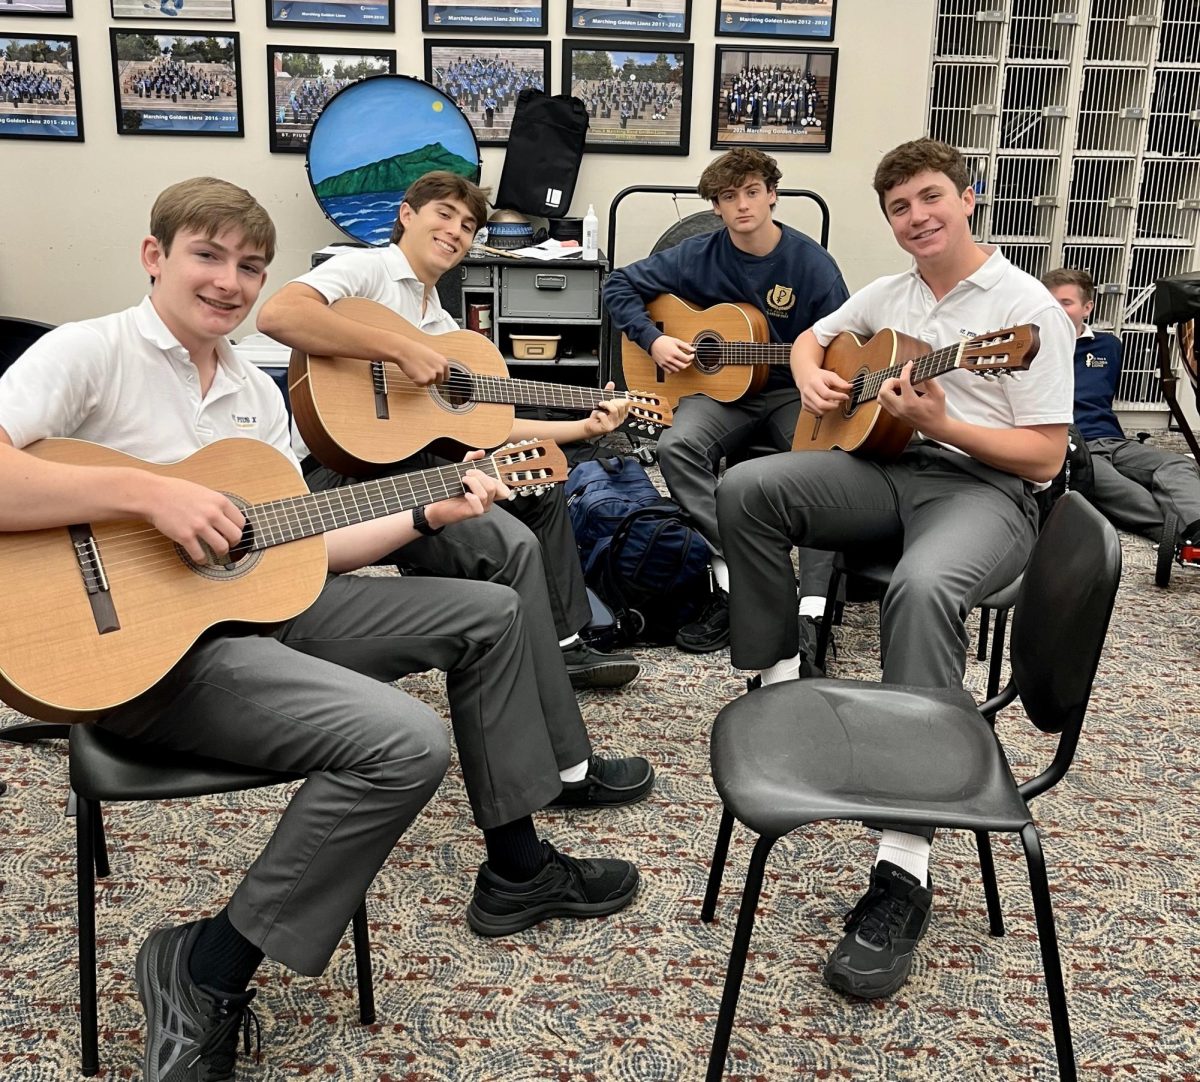 Students+in+Advanced+Guitar+prepare+for+Morning+of+the+Arts+on+November+15.+They+will+perform+at+their+annual+Christmas+concert+with+the+Band+program+on+December+7.+Theater+and+Chorus+will+have+their+show+on+December+6+followed+by+Dance+on+December+7.+Staff+photo.